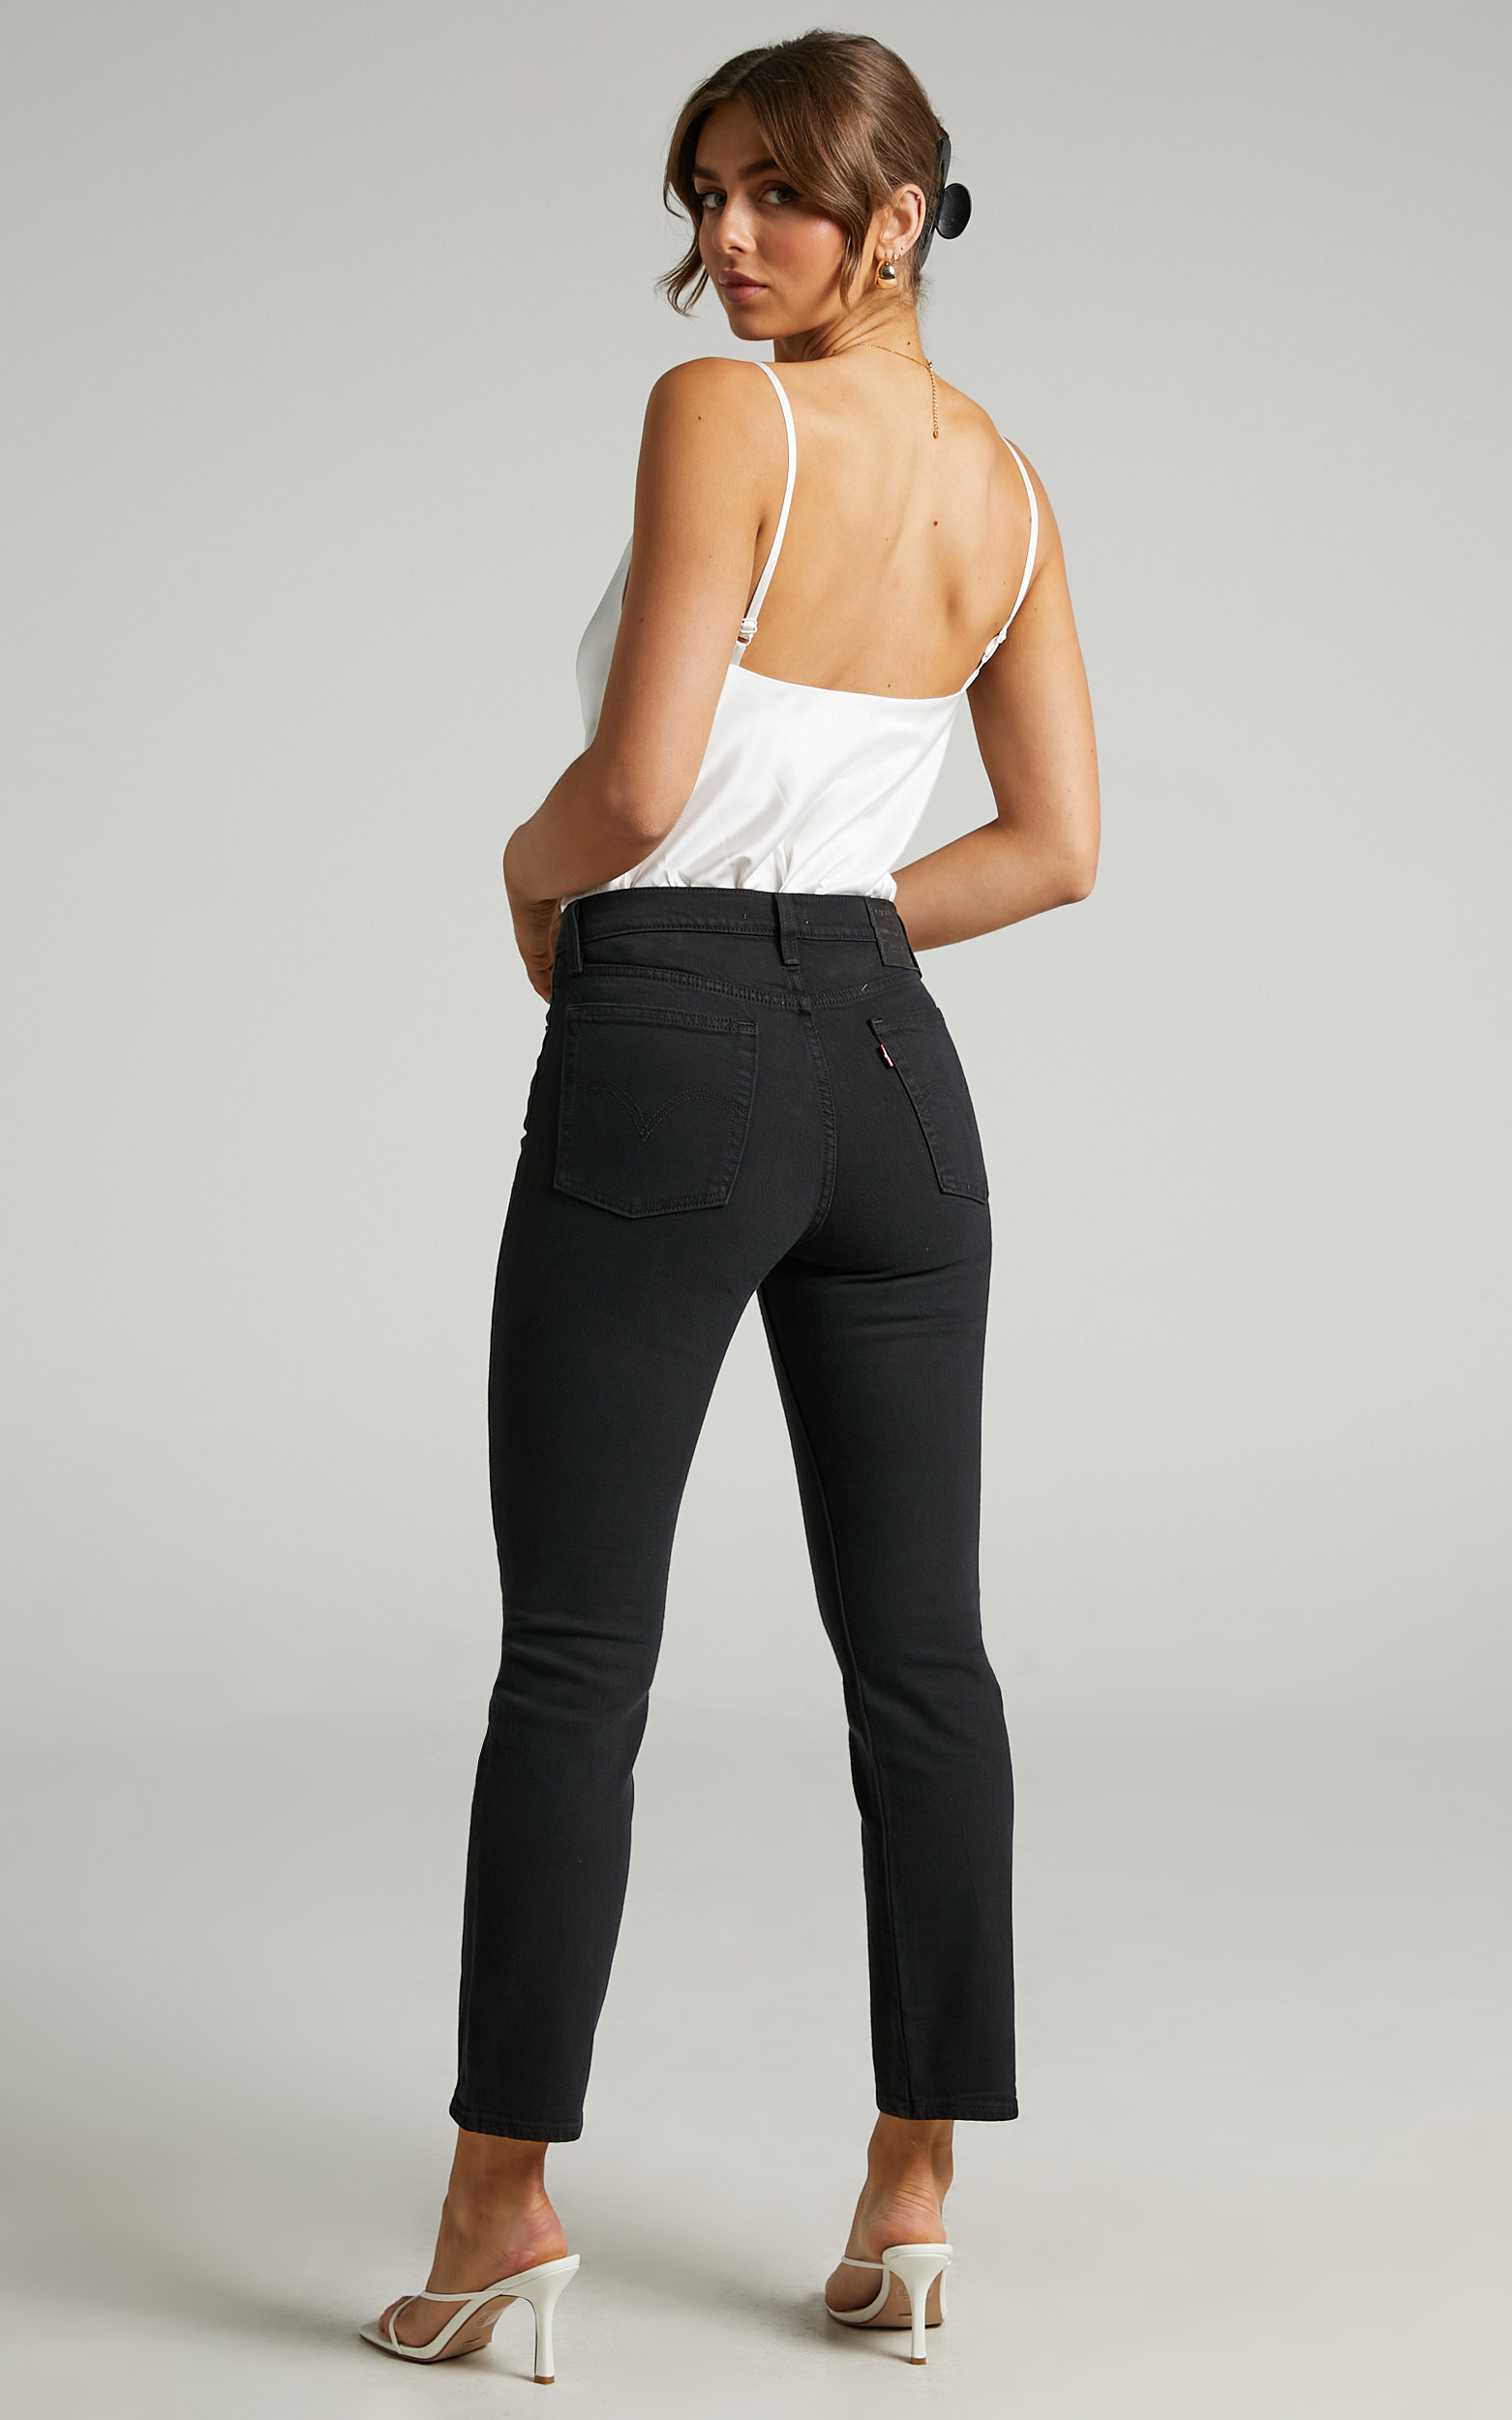 Levi's - Wedgie Straight Jean in Black Sprout - 06, BLK1, hi-res image number null